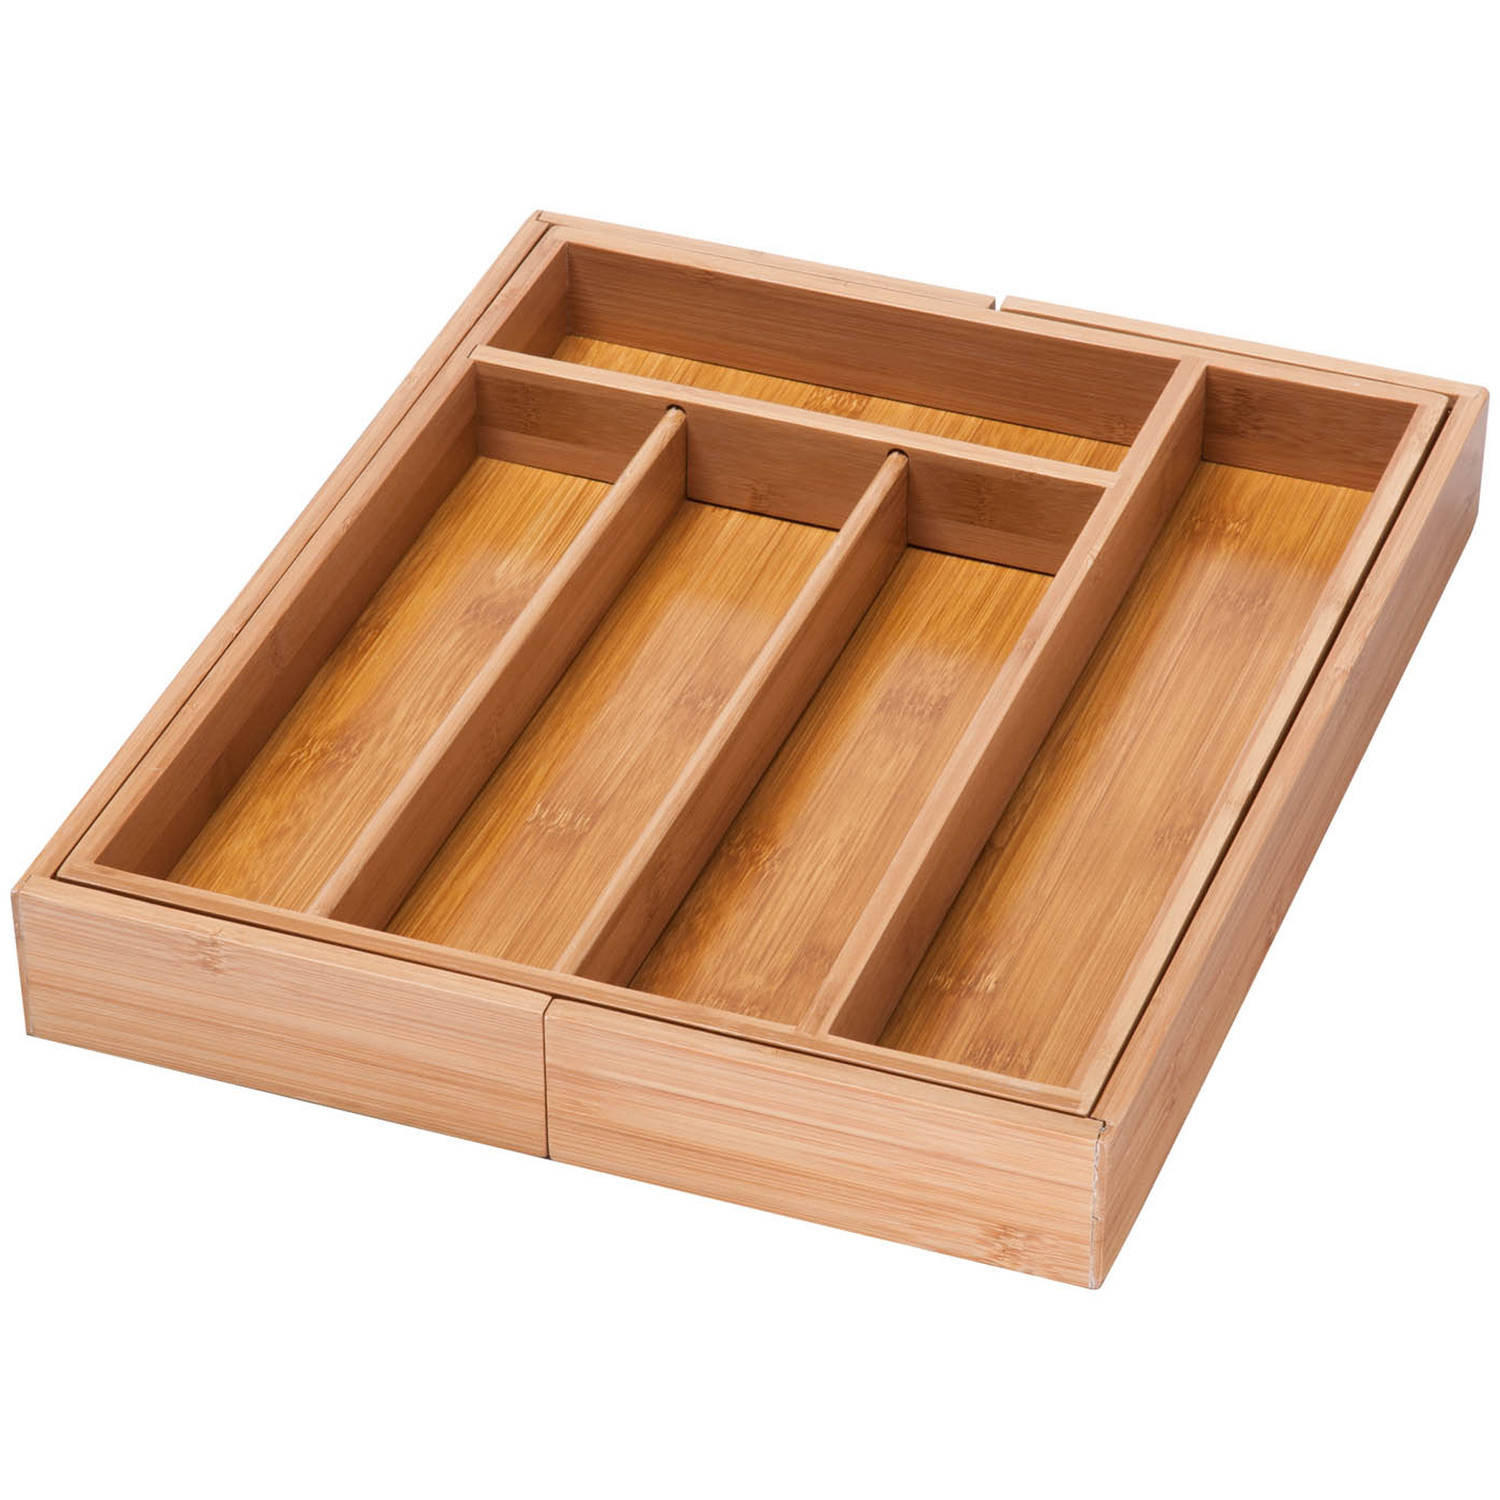 Honey-Can-Do Bamboo 17" D x 22.75" W x 2.3" 7-Compartment Expandable Kitchen Drawer Organizer, Natural - image 3 of 7